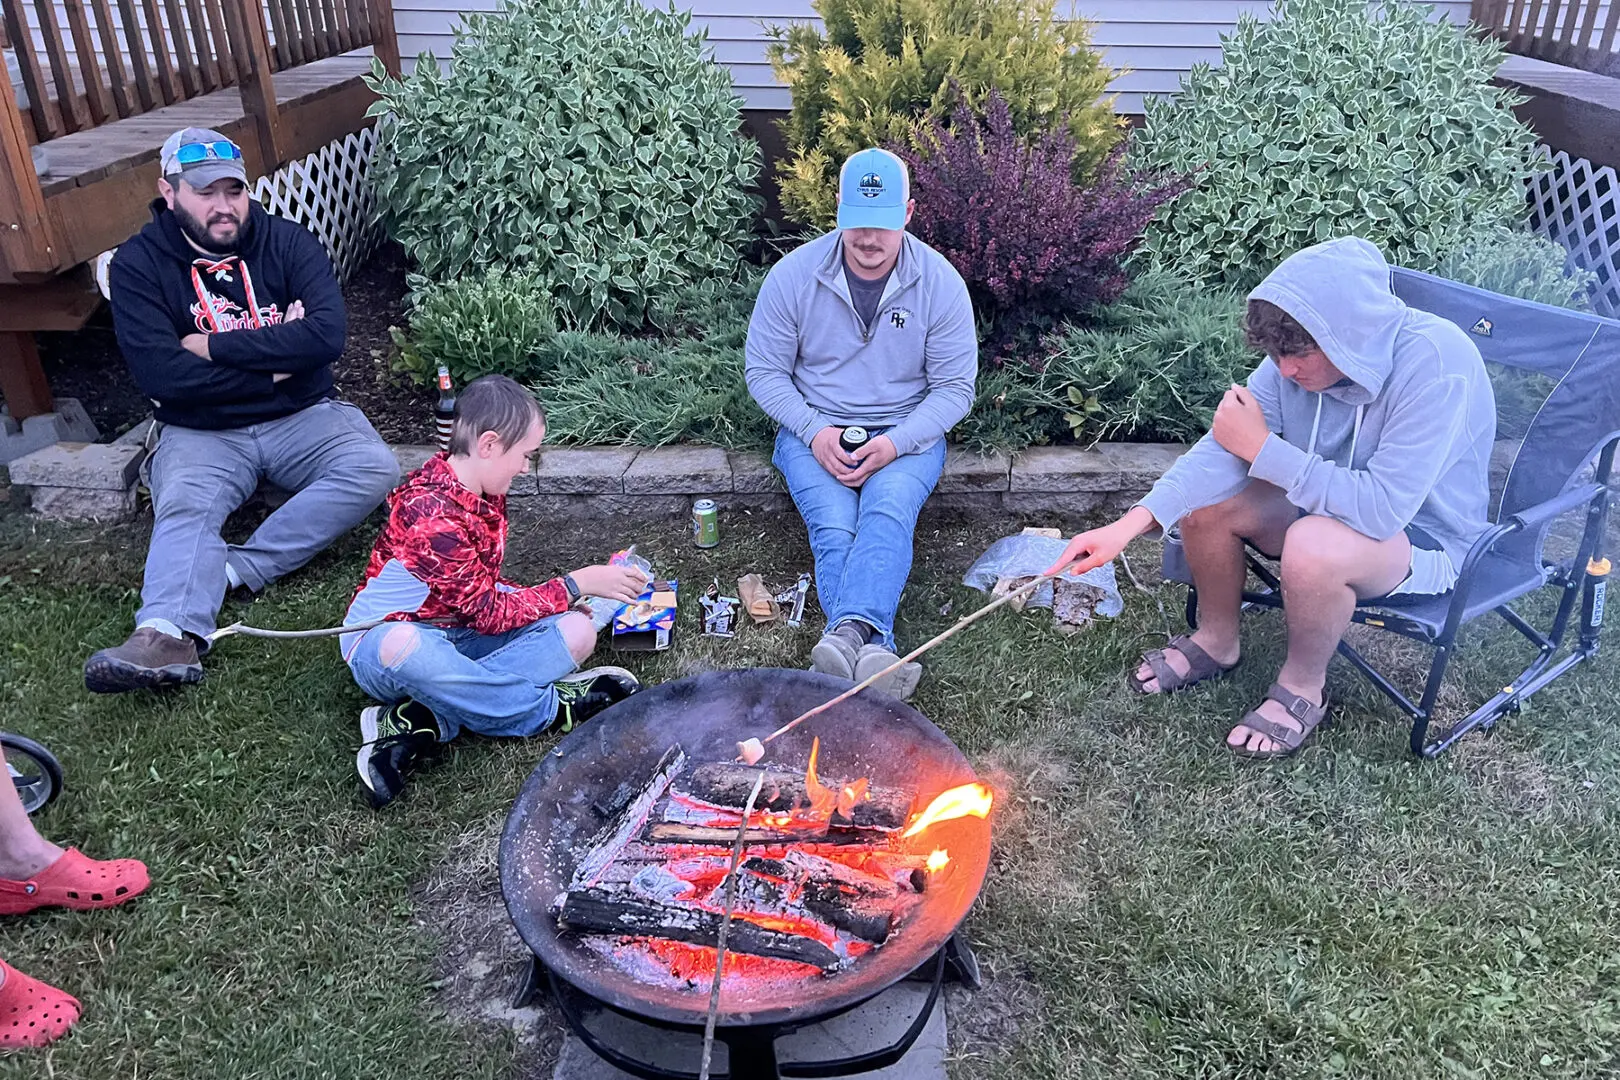 A group of people sitting around a fire pit.